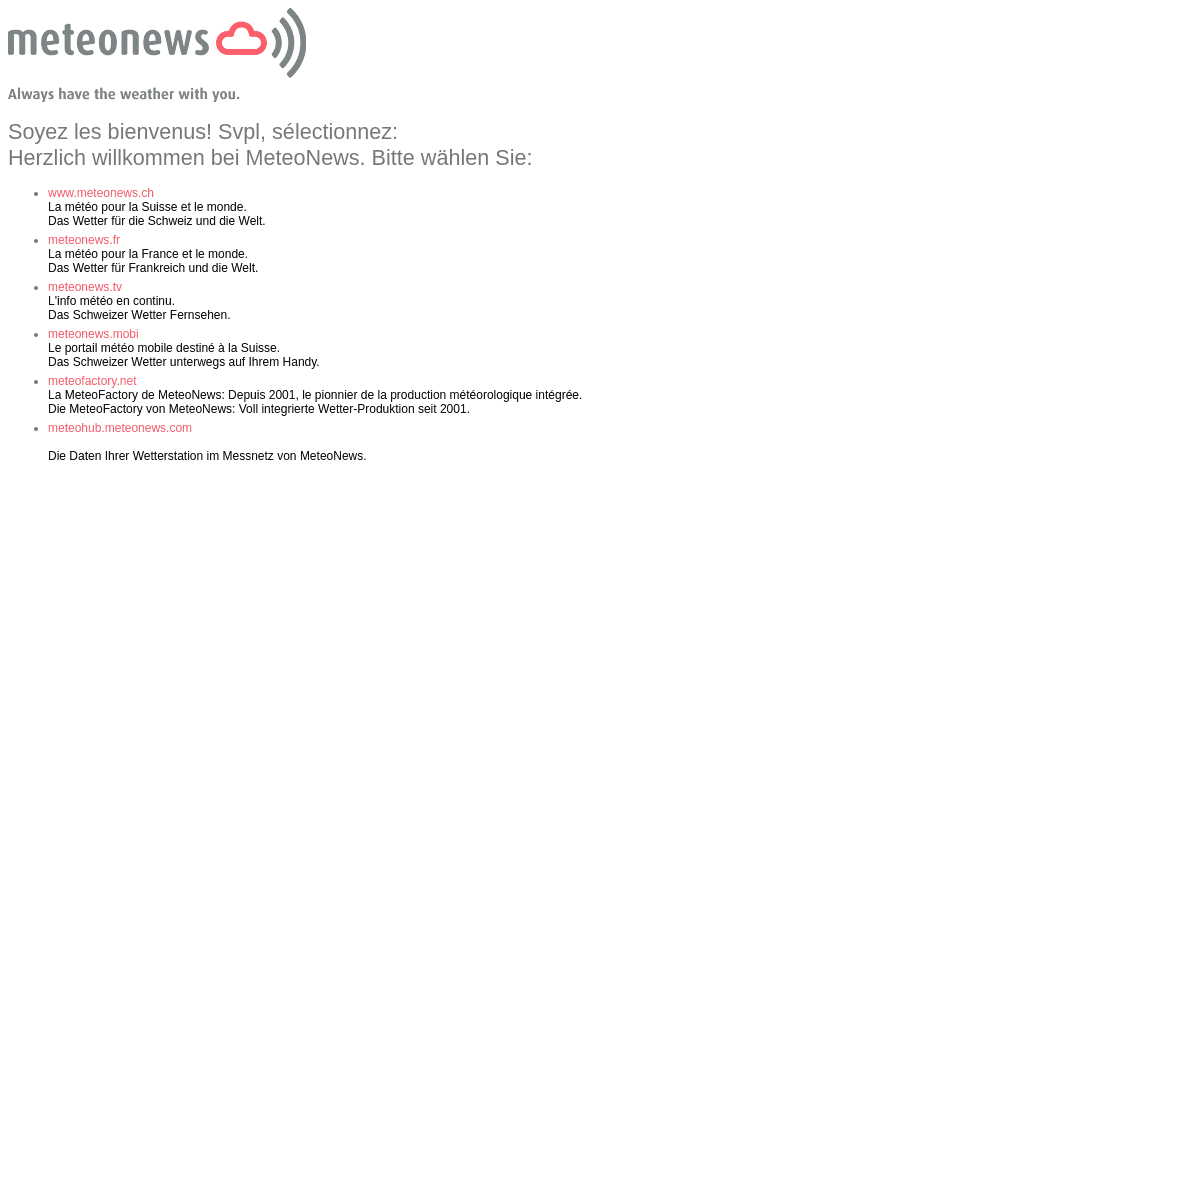 A complete backup of meteonews.net